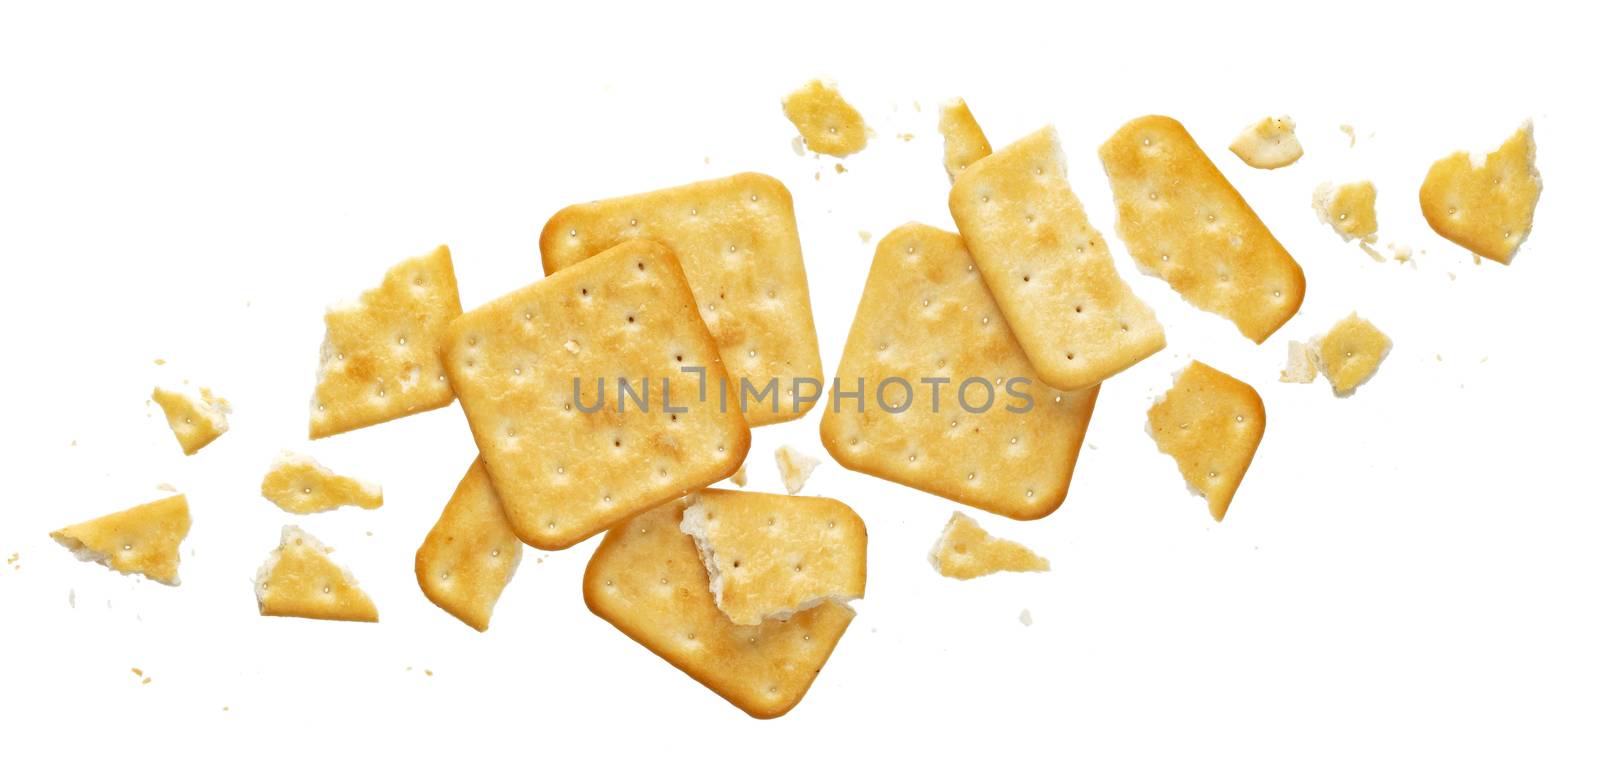 Broken cracker isolated on white background. Crushed dry cracker cookies isolated with clipping path, top view